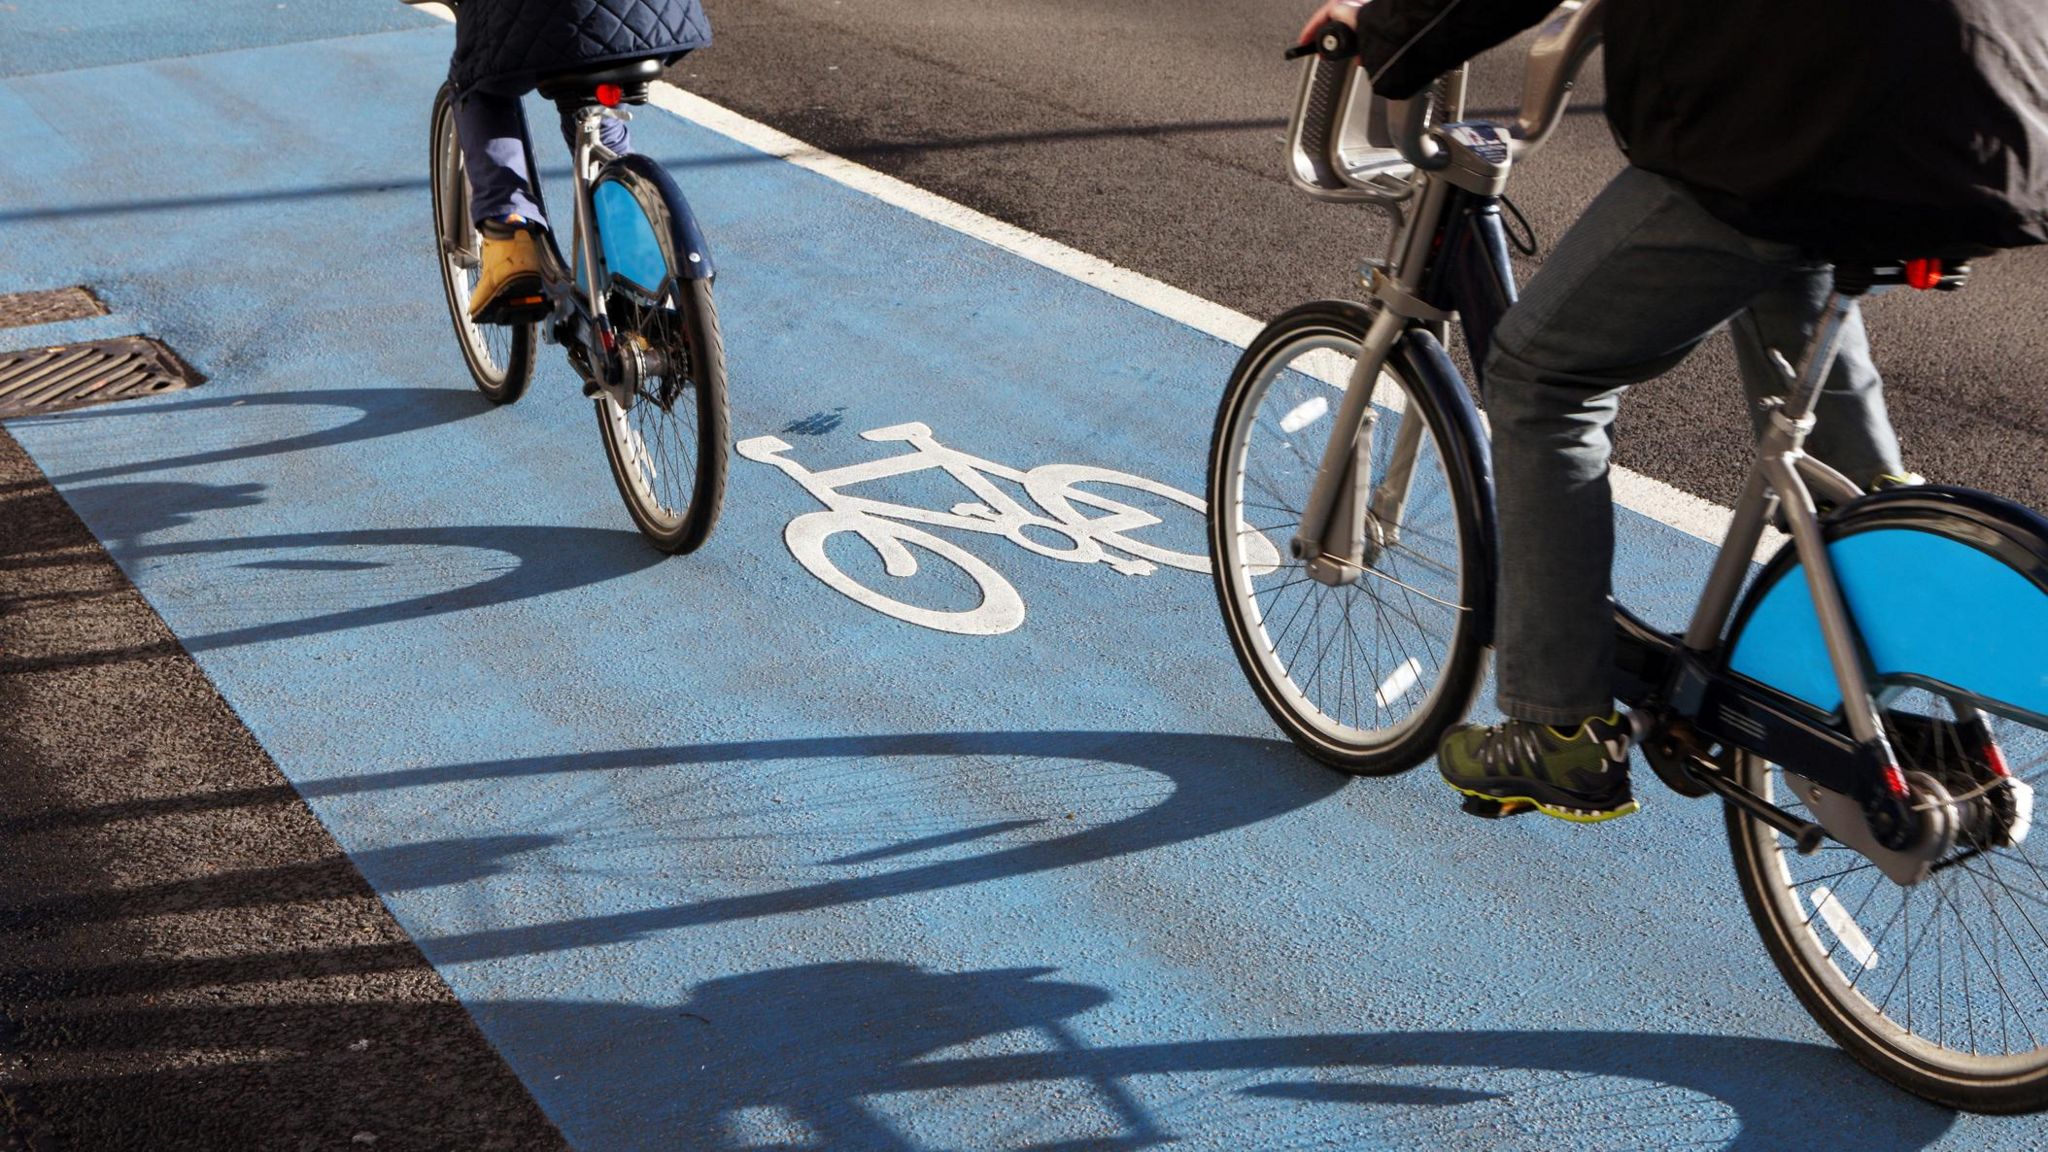 Cycling in a cycle lane